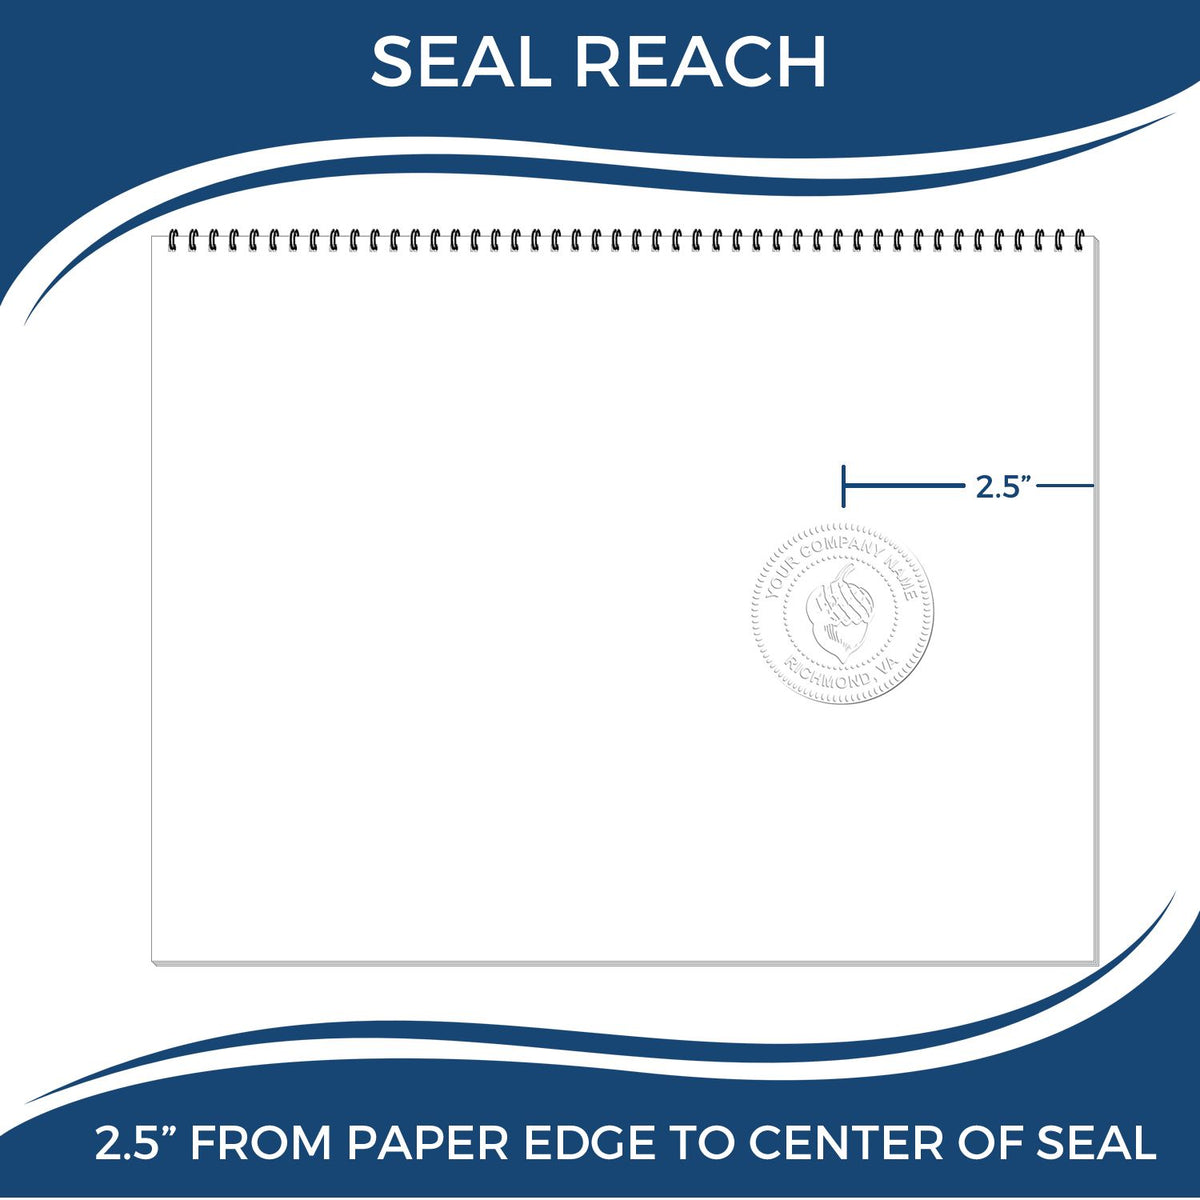 An infographic showing the seal reach which is represented by a ruler and a miniature seal image of the State of West Virginia Long Reach Architectural Embossing Seal